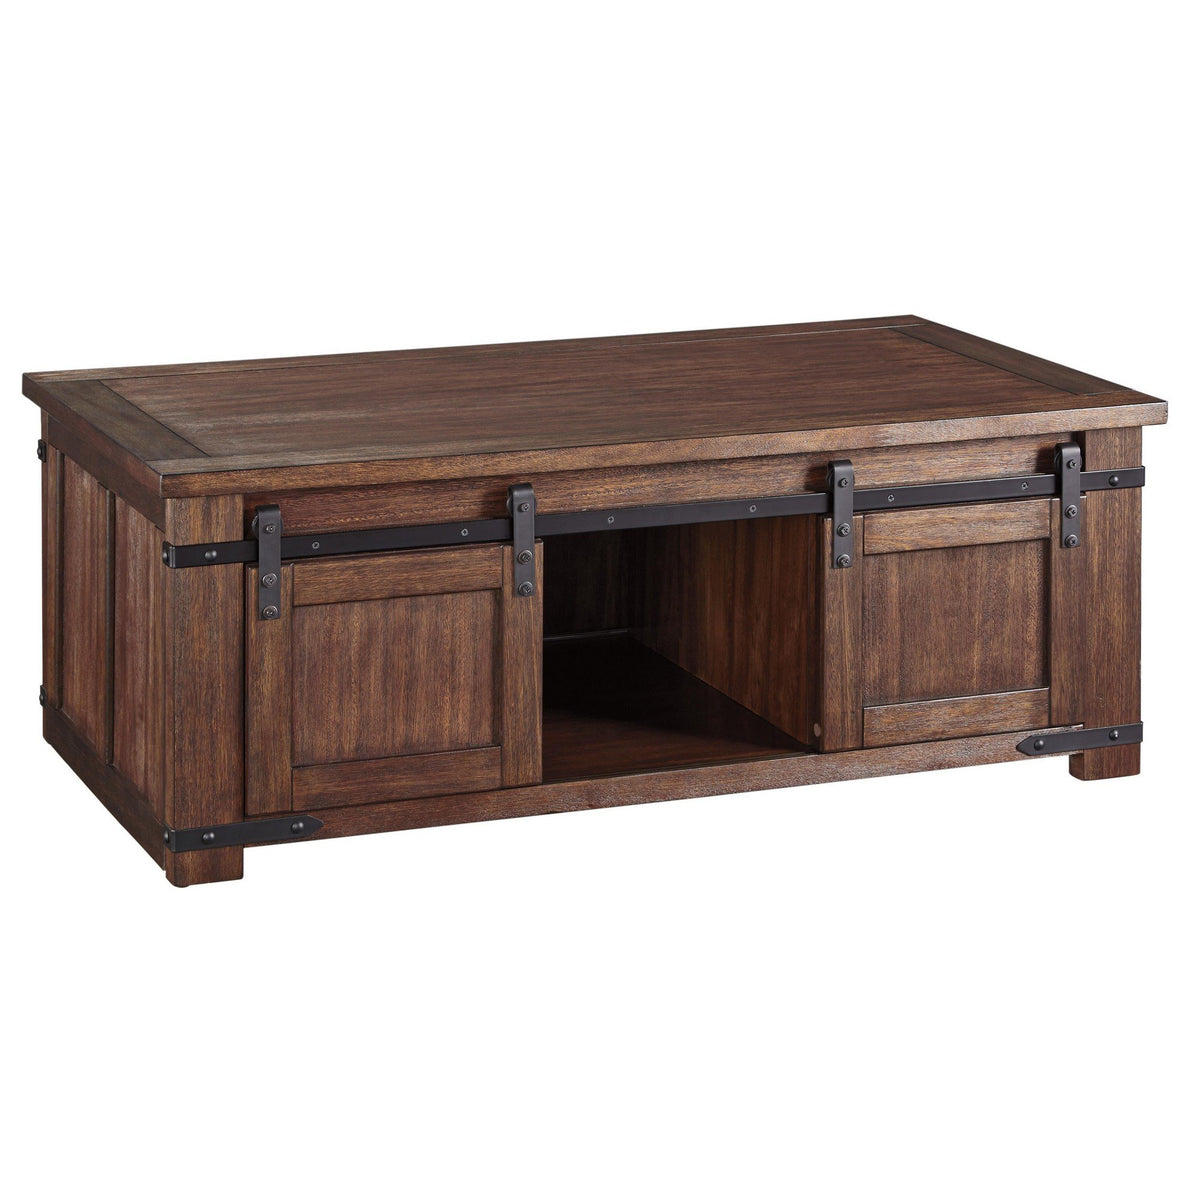 Rectangular Wooden Cocktail Table with 2 Barn Sliding Door Cabinets in Brown - BM213232